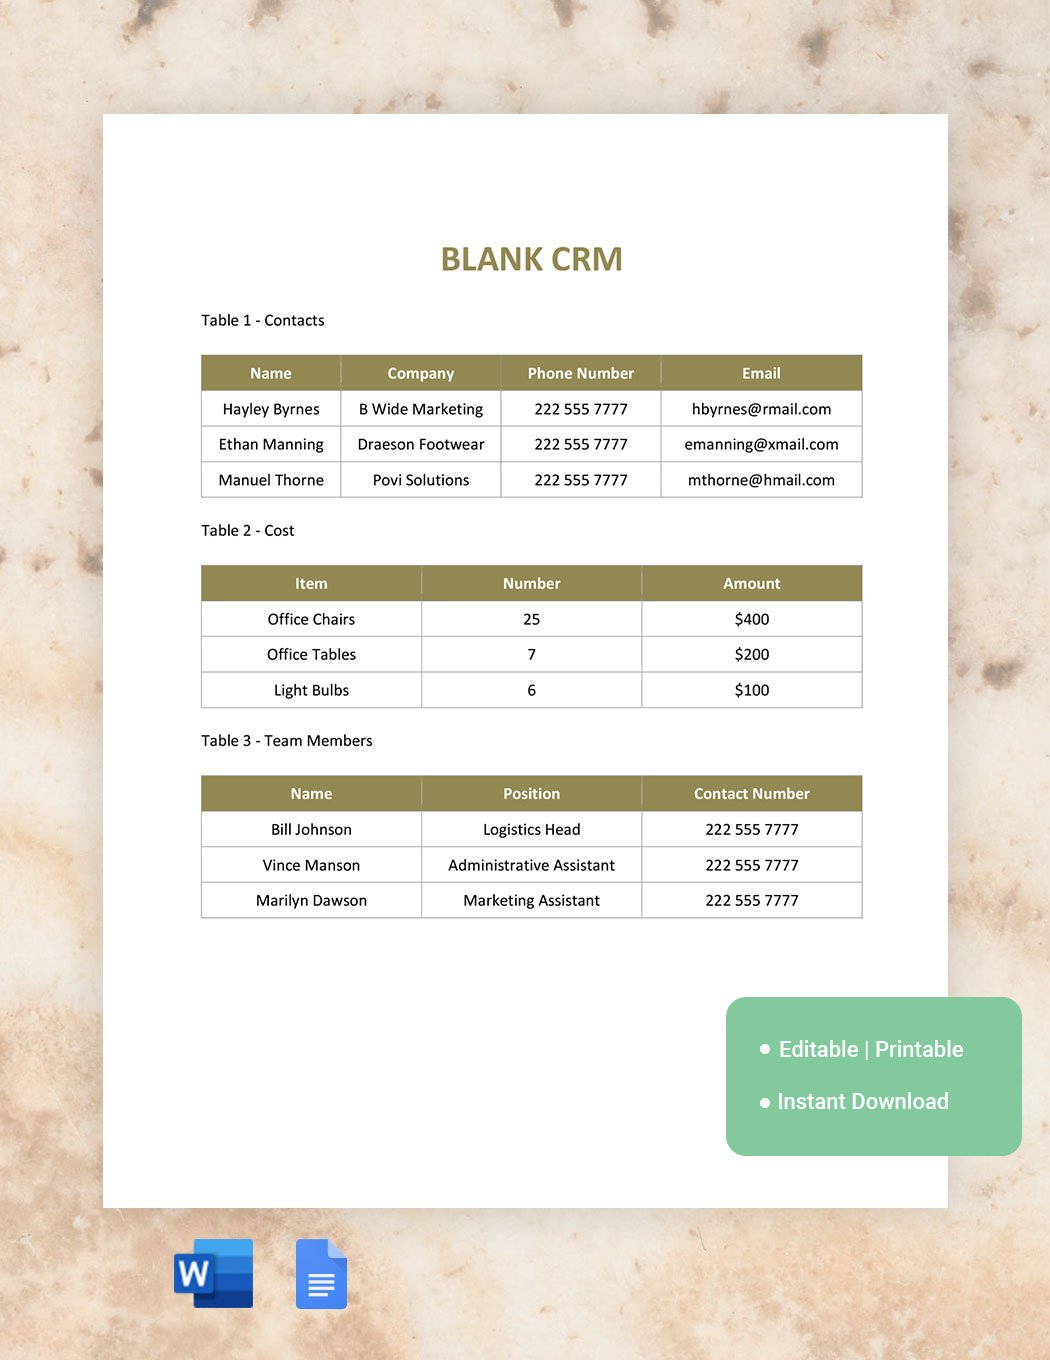 Blank CRM Template in Word, Google Docs